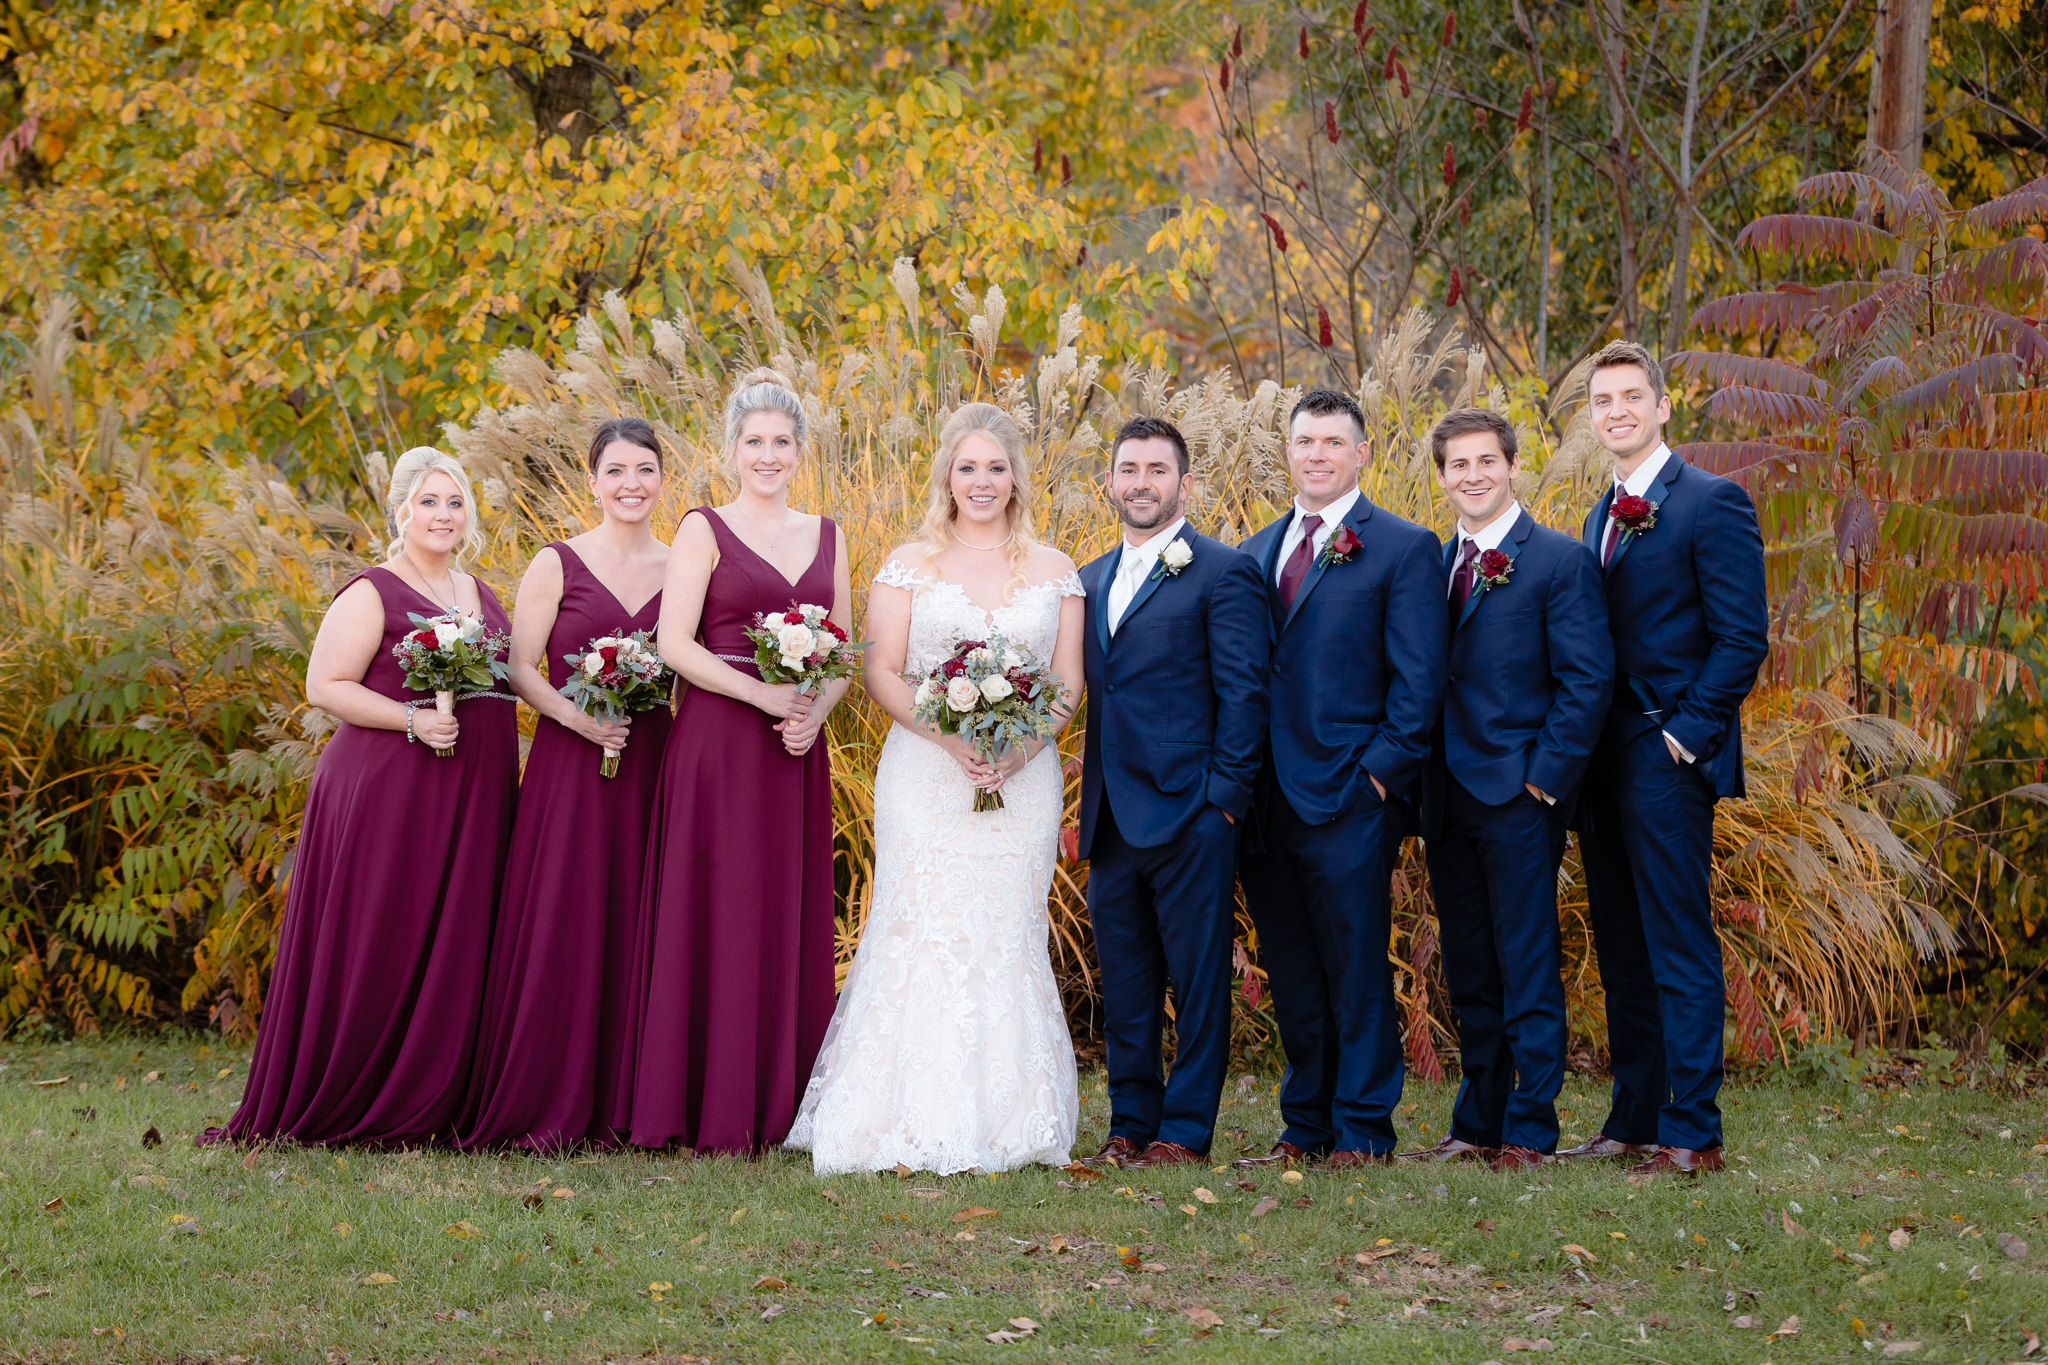 Bridal party in burgundy Morilee dresses and navy tuxes before a Riverside Landing wedding reception